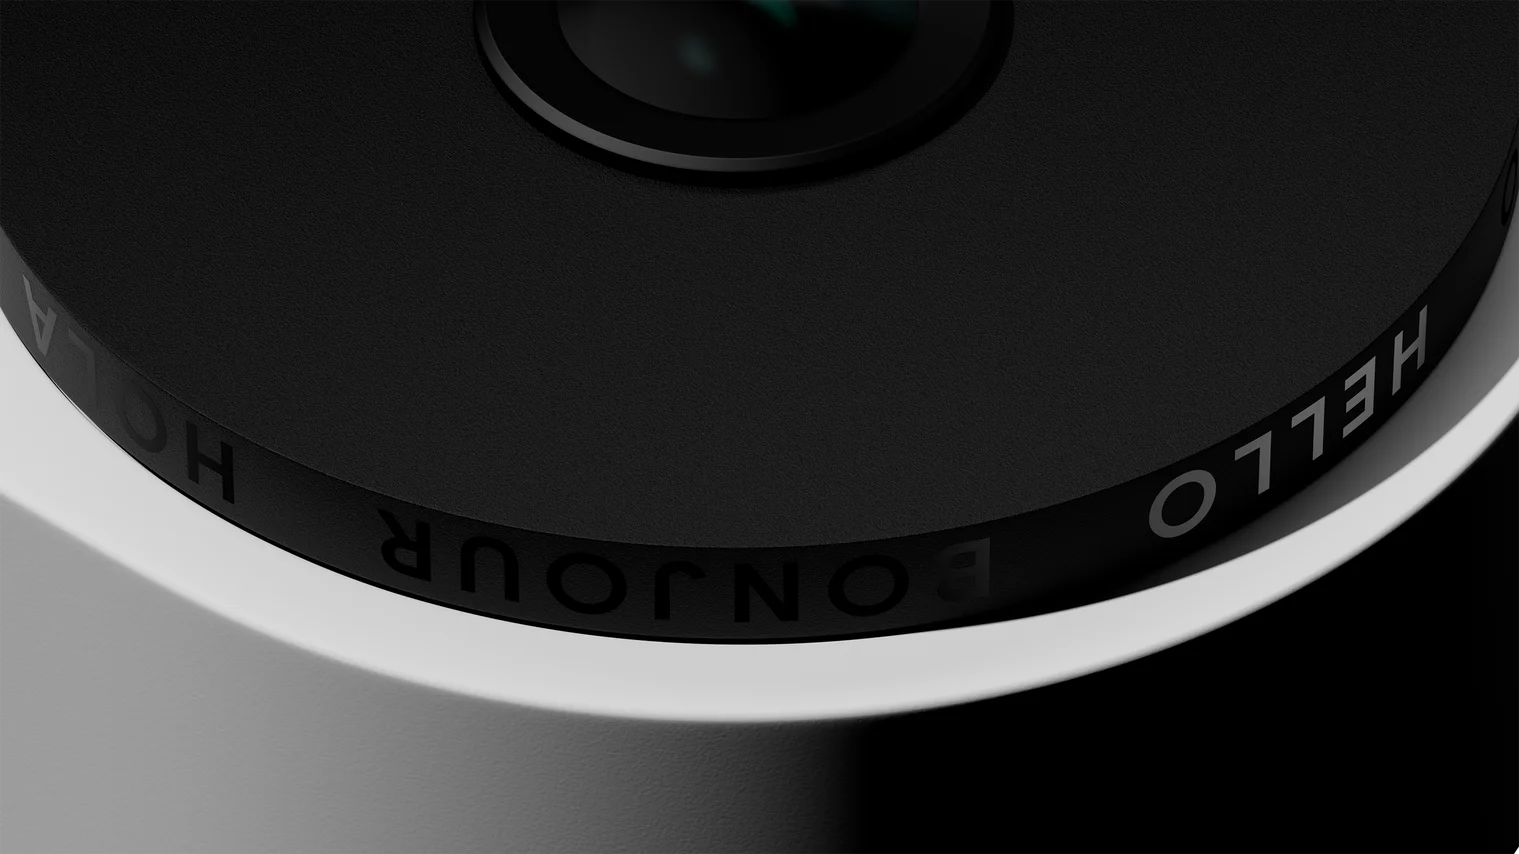 A close-up of the lens on the new wired doorbell.